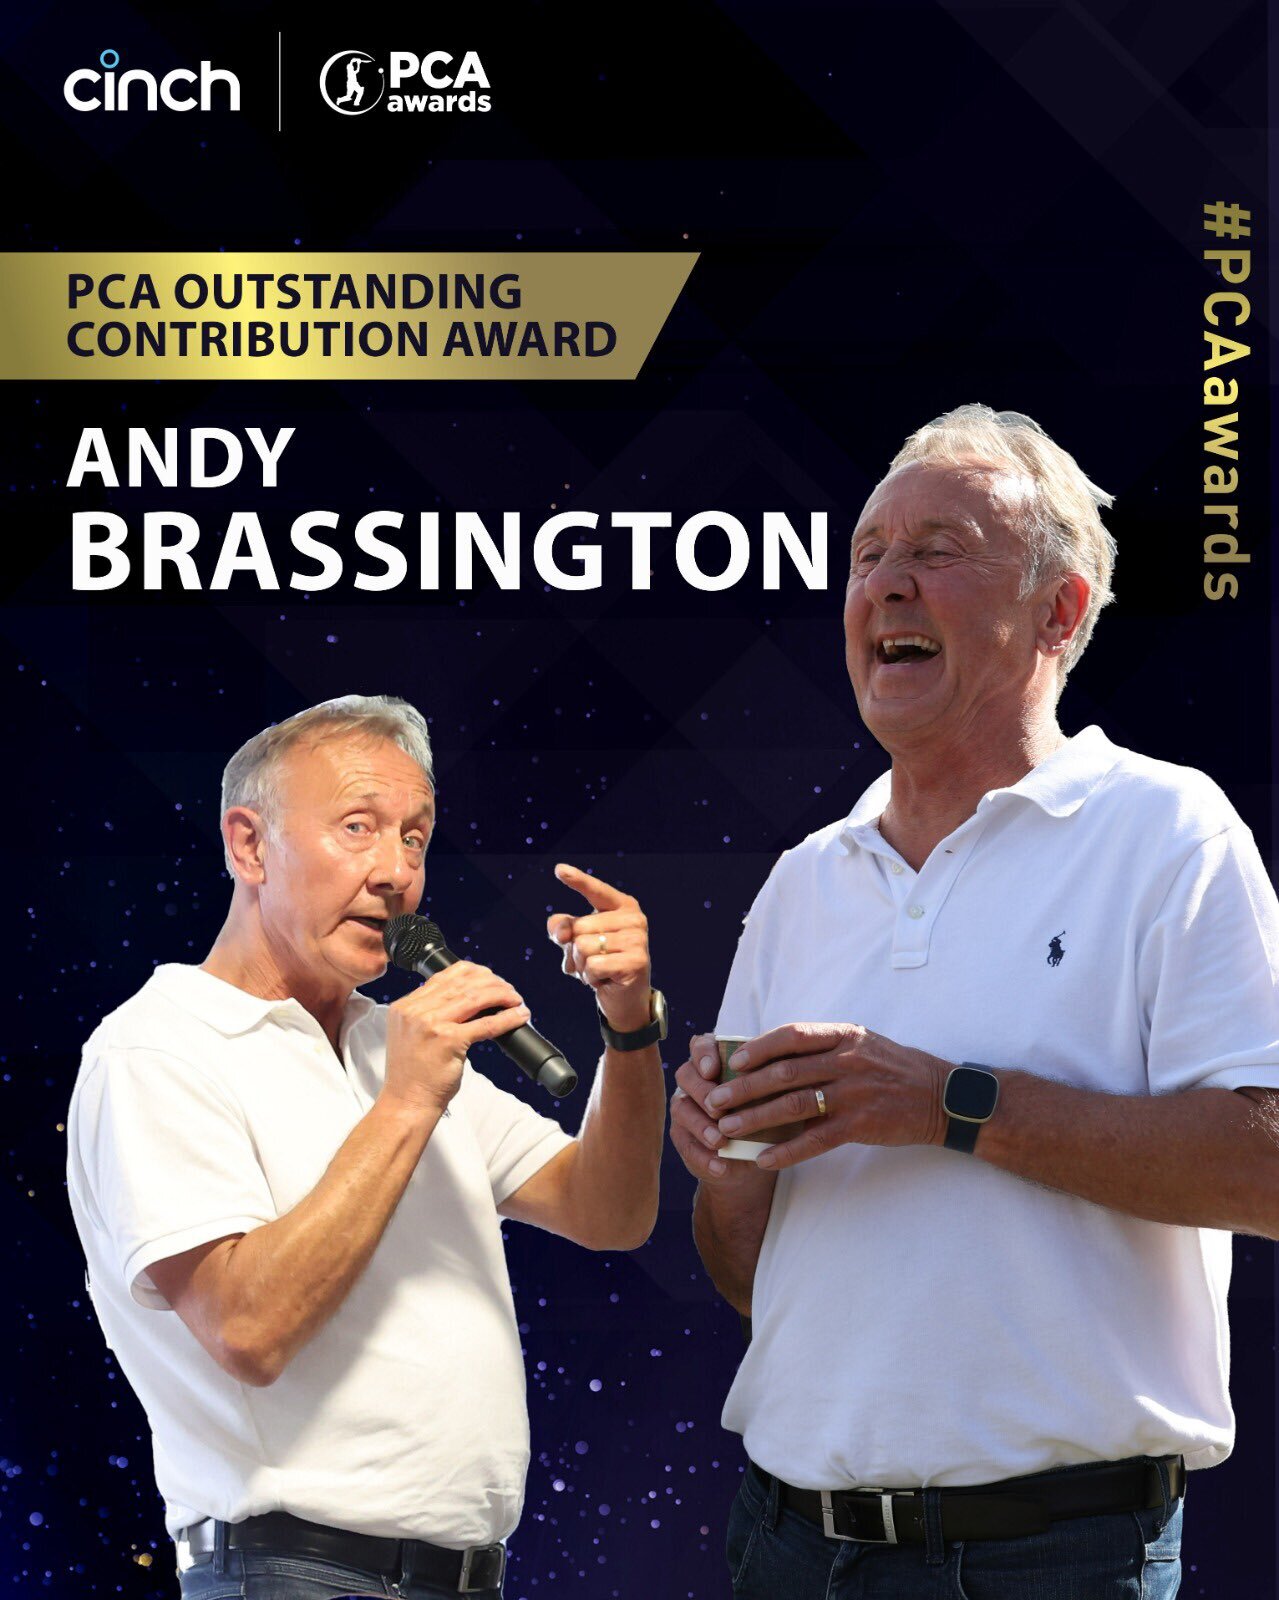 PCA Outstanding Contribution Award - Andy Brassington